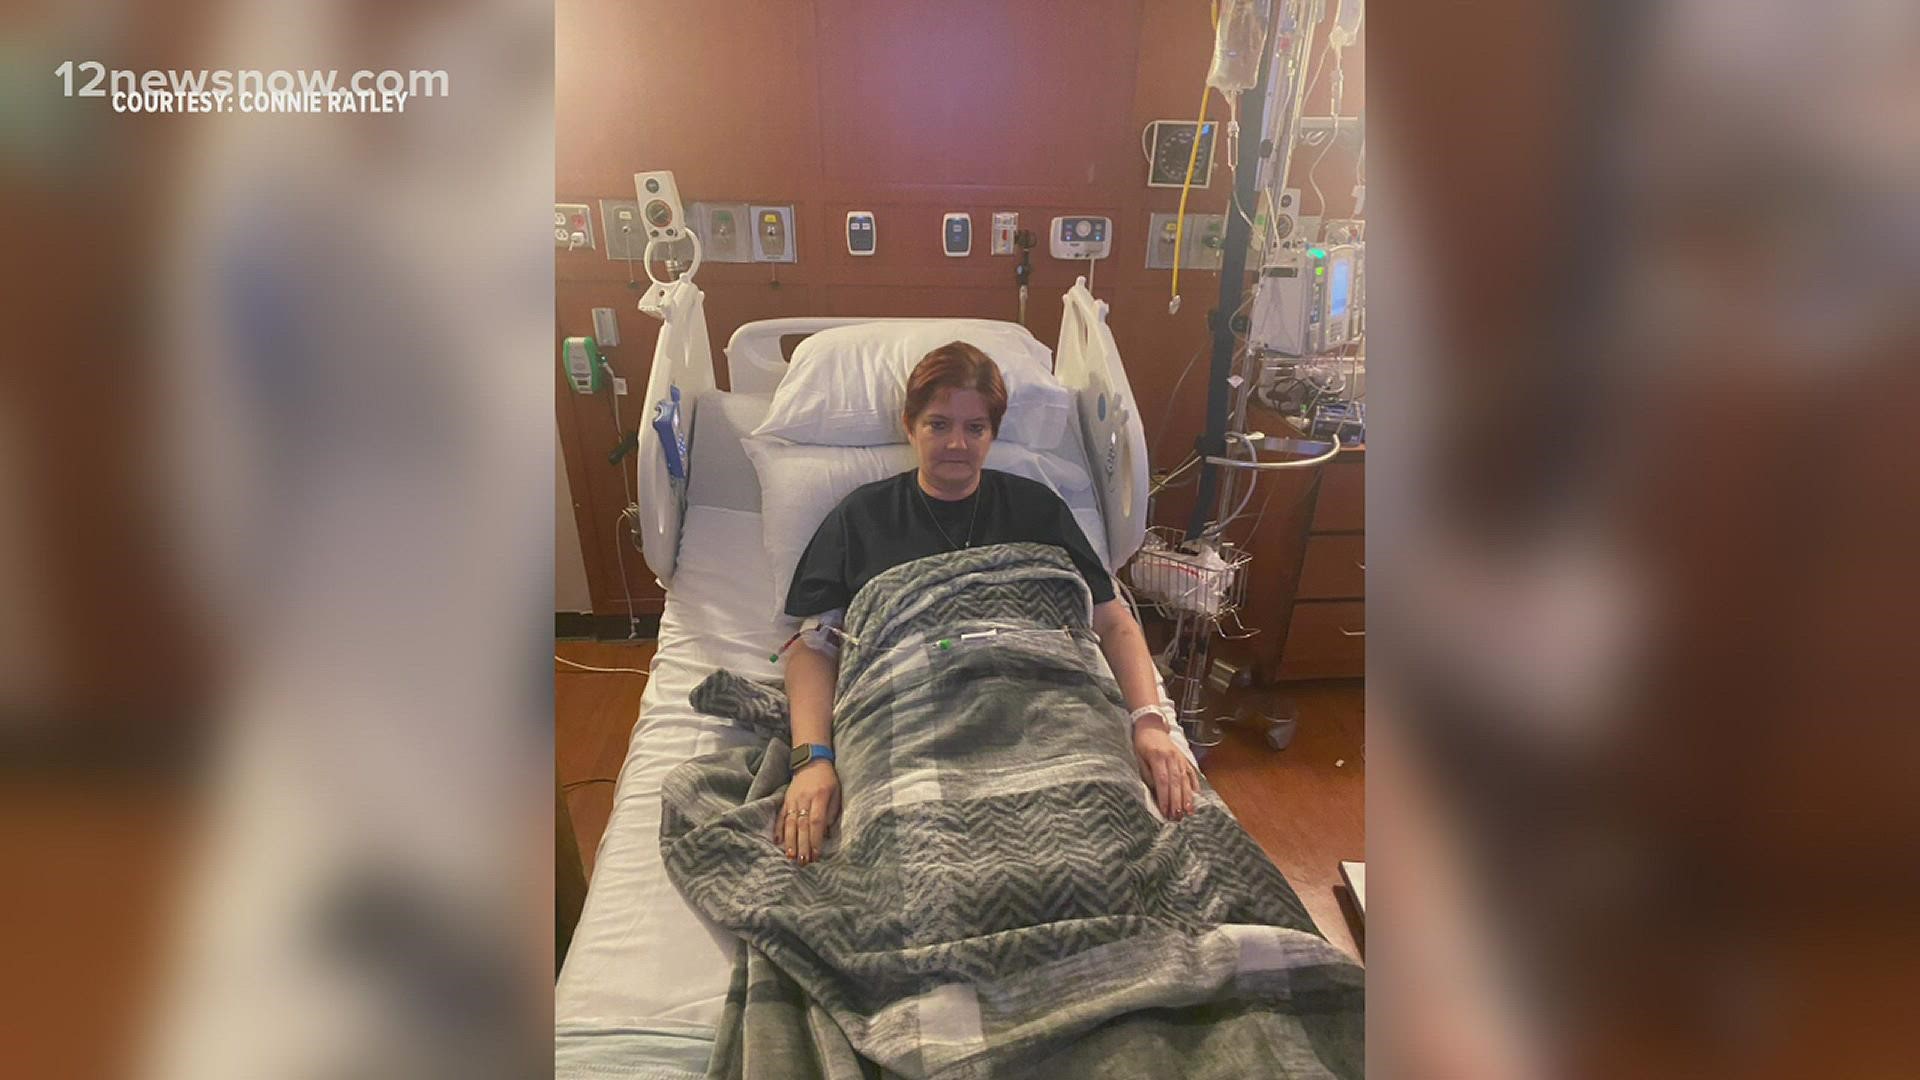 Connie Ratley has been undergoing chemotherapy at MD Anderson for 10 days.